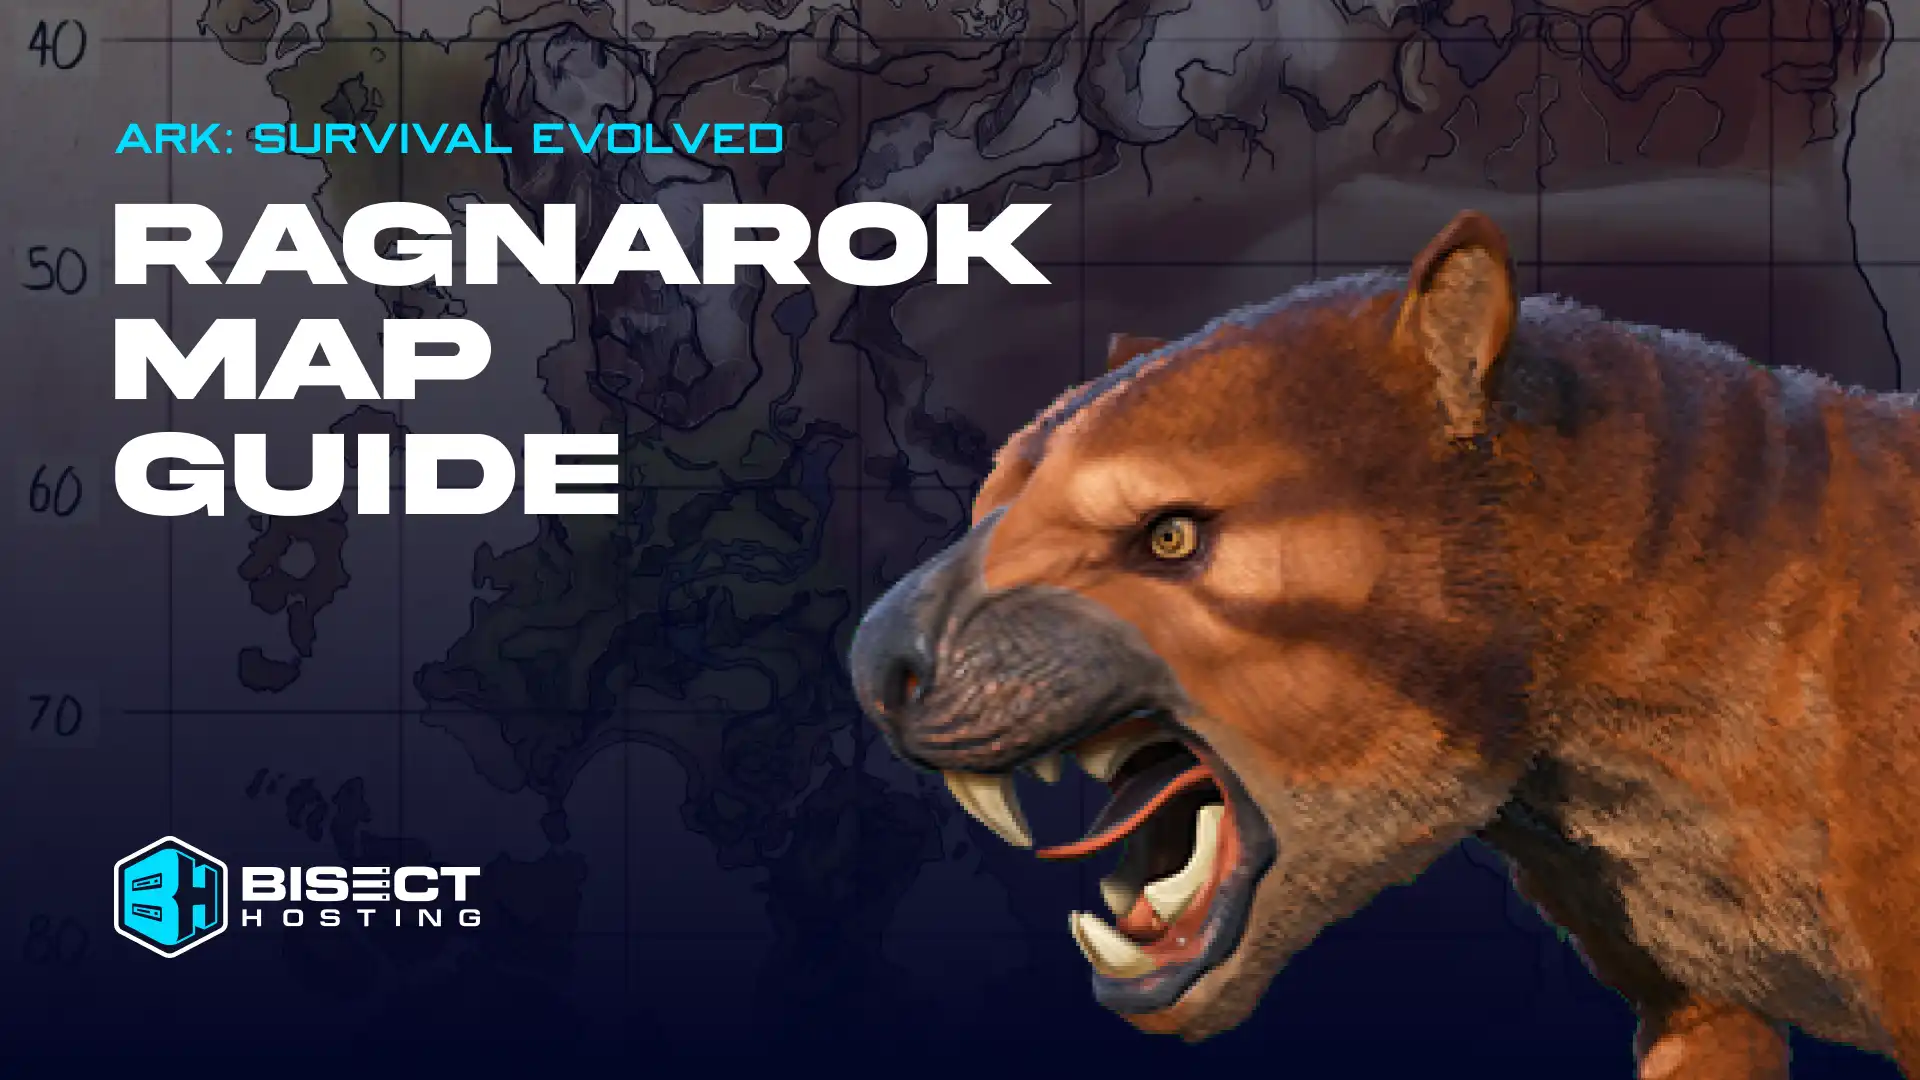 ARK: Survival Evolved Ragnarok Map Guide: Resource Locations, Bosses, and Dinos